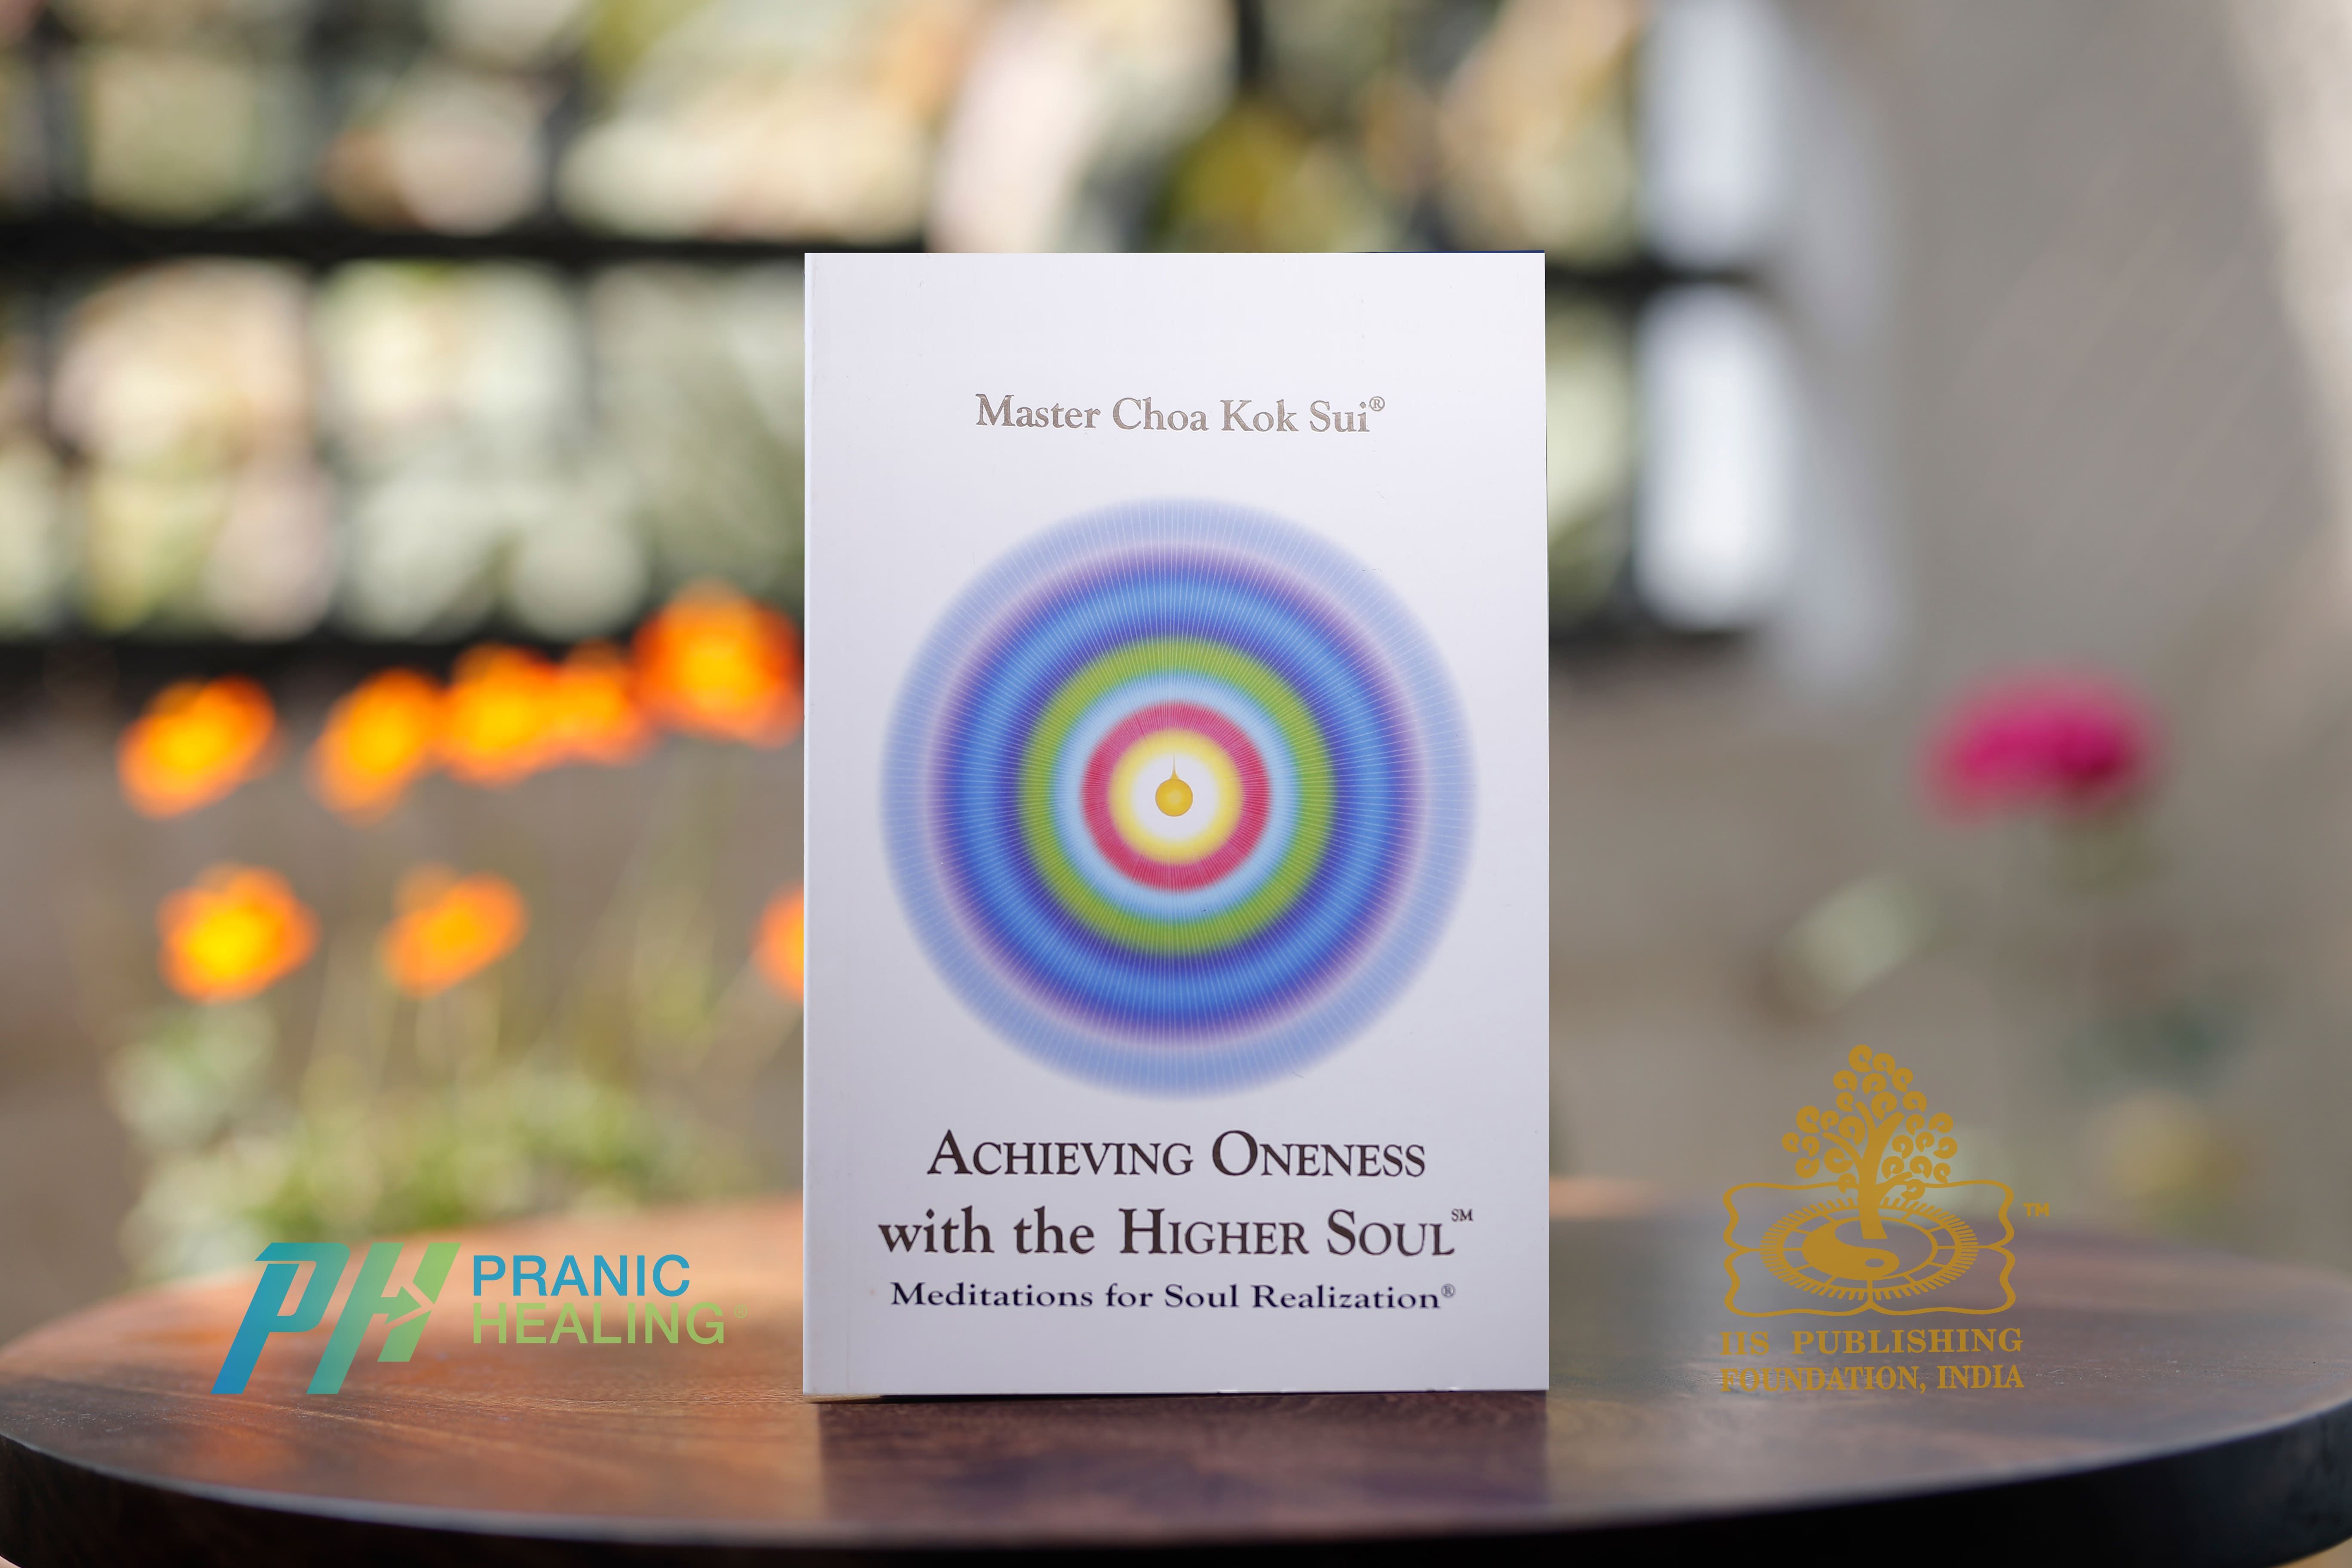 https://shop.pranichealingmumbai.com/products/achieving-oneness-with-higher-soul